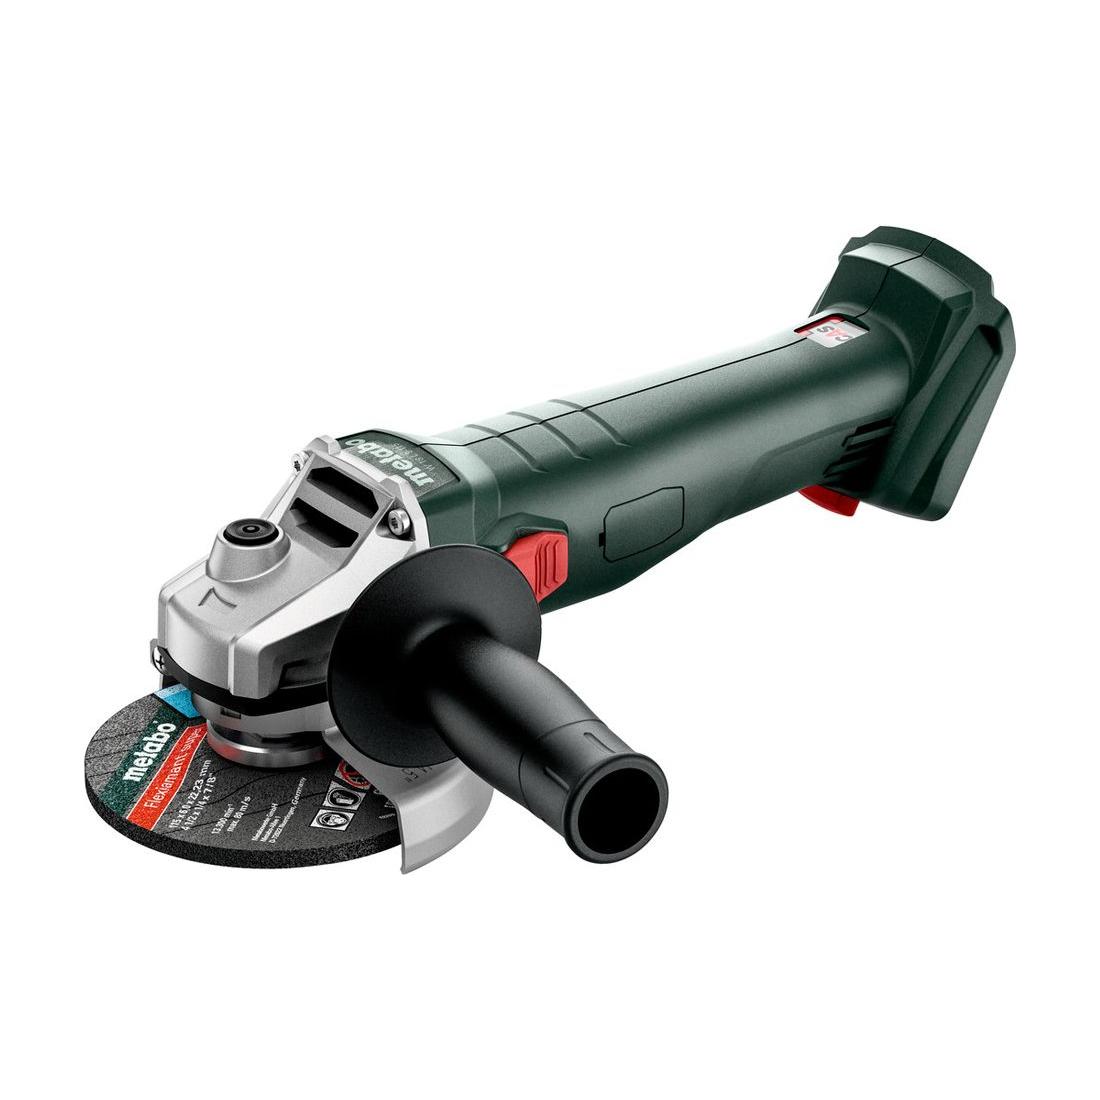 Metabo Cordless Angle Grinder 115mm W 18 L 9-115 18V Body Only in MetaBOX Case